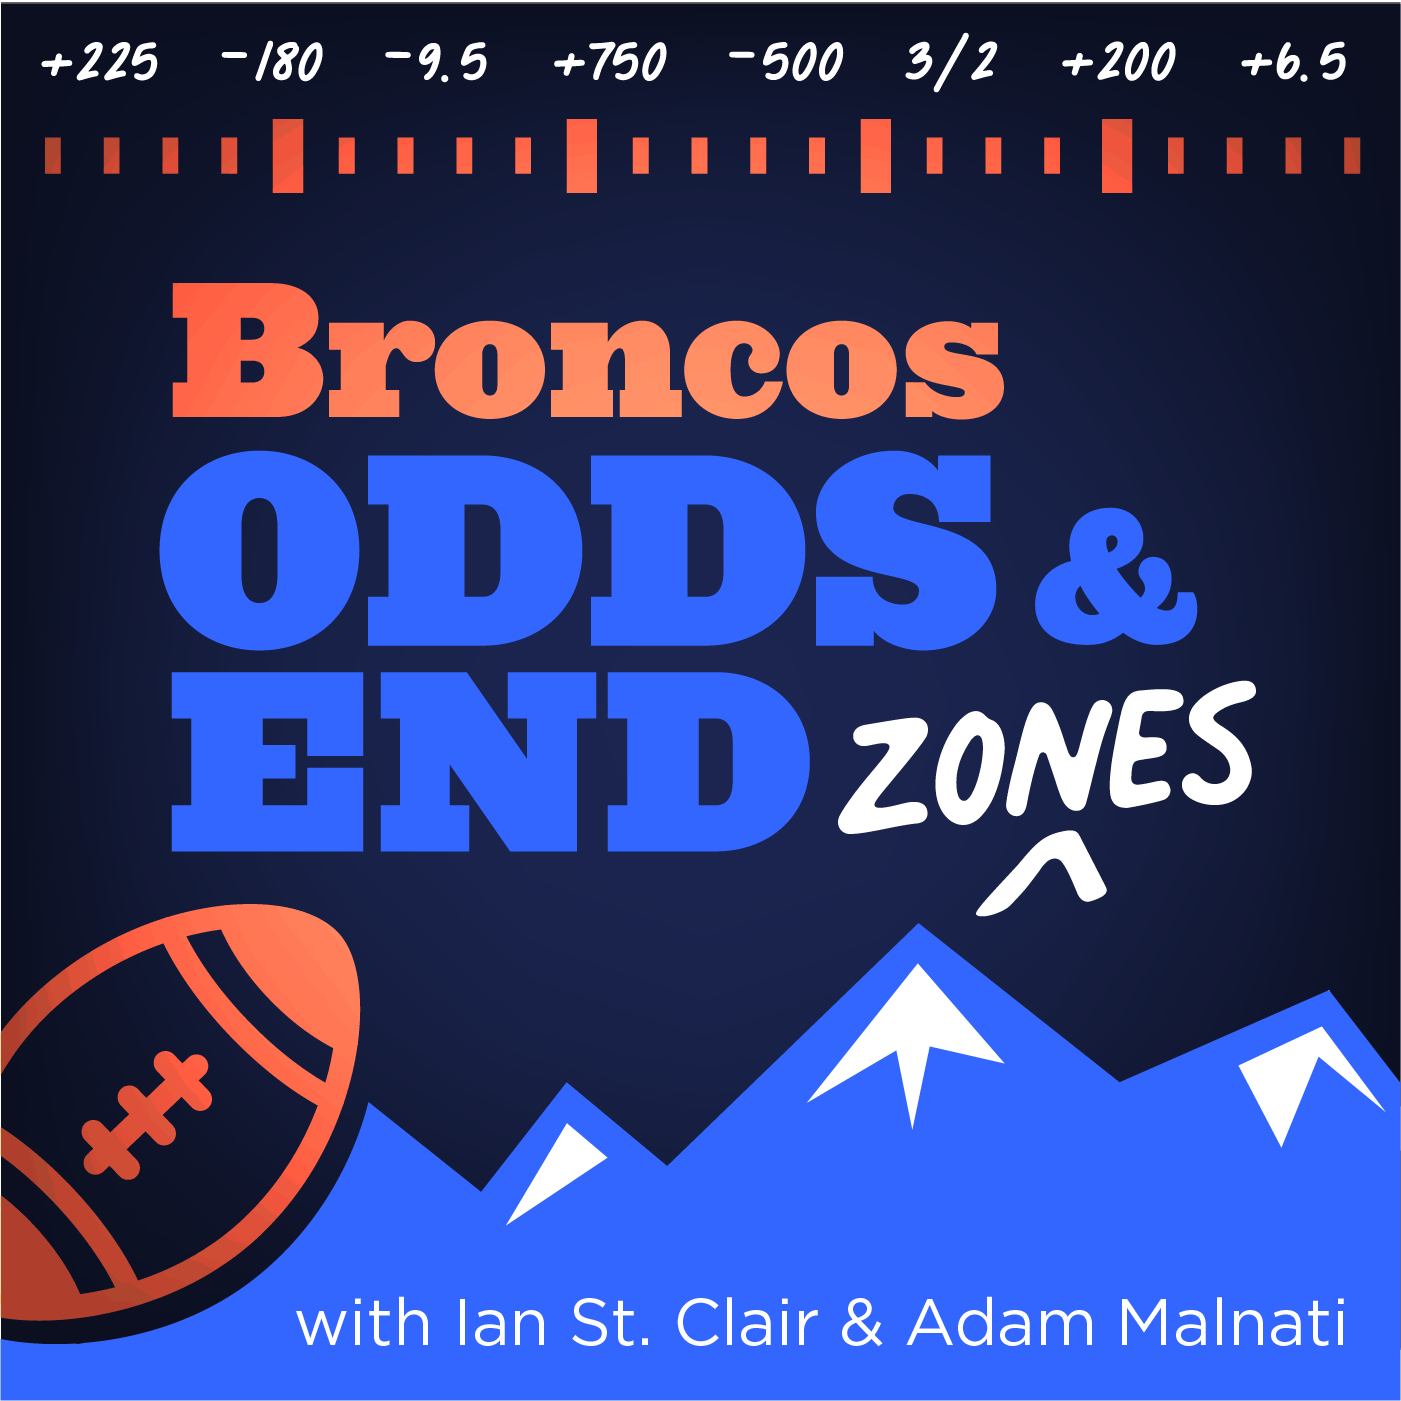 Adam & Ian are excited about the Broncos draft and you should too